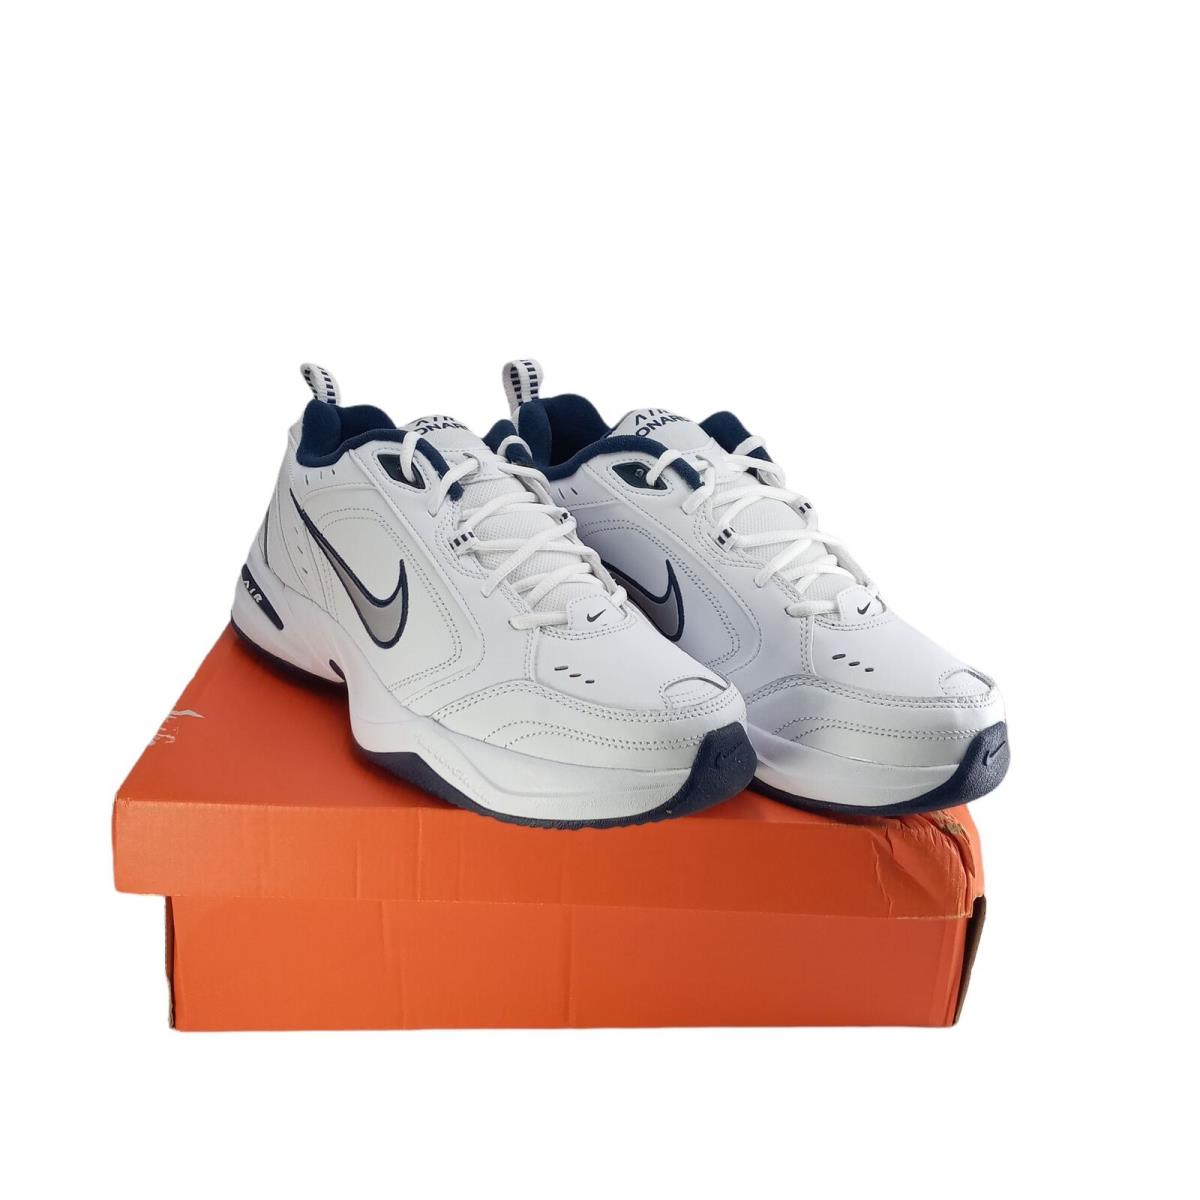 Nike Air Monarch IV White Blue Mens Size 11.5 Athletic Shoes Sneakers 415445-102